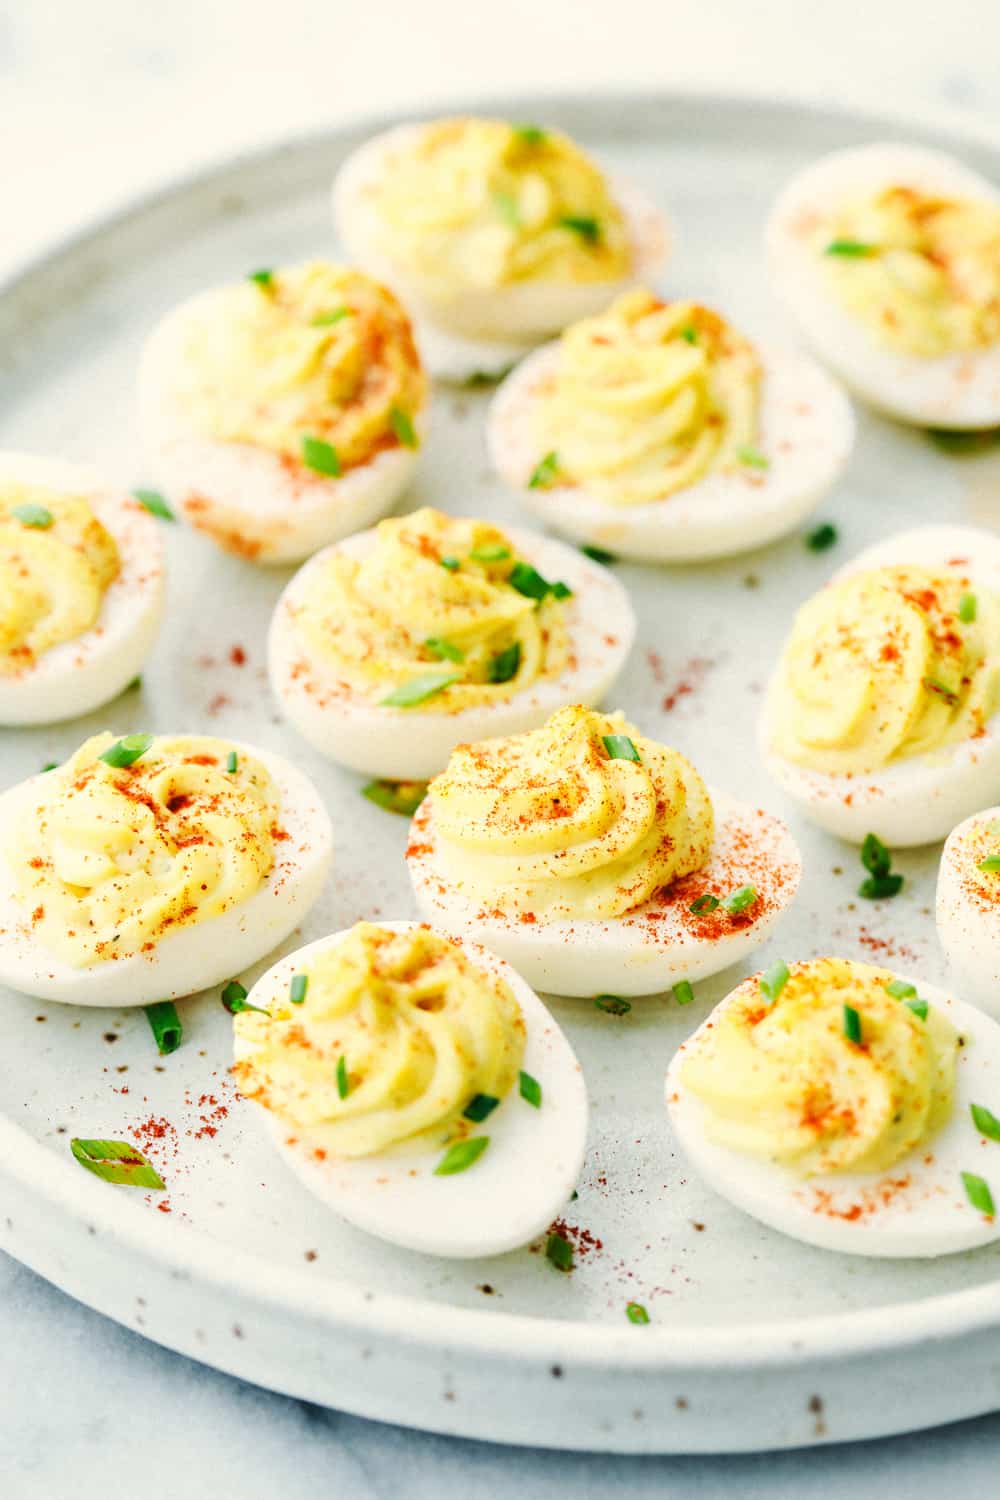 Deviled eggs on a plate with paprika sprinkled over top.